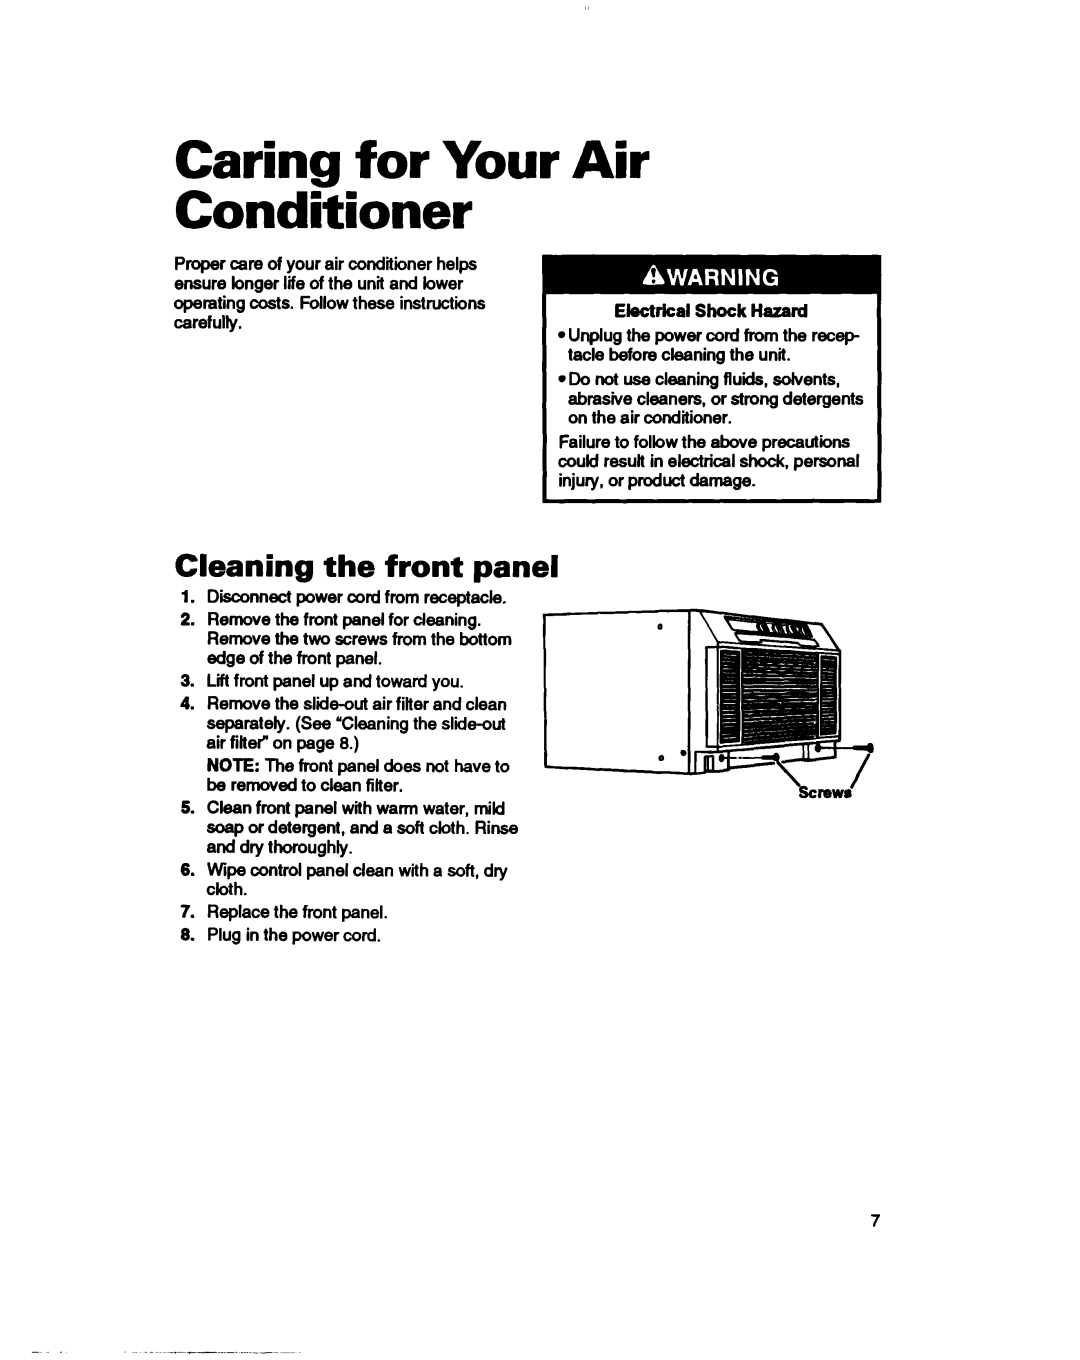 Whirlpool ACE184XD0 warranty Caring for Your Air Conditioner, Cleaning the front panel, Electrical Shock Hazard 